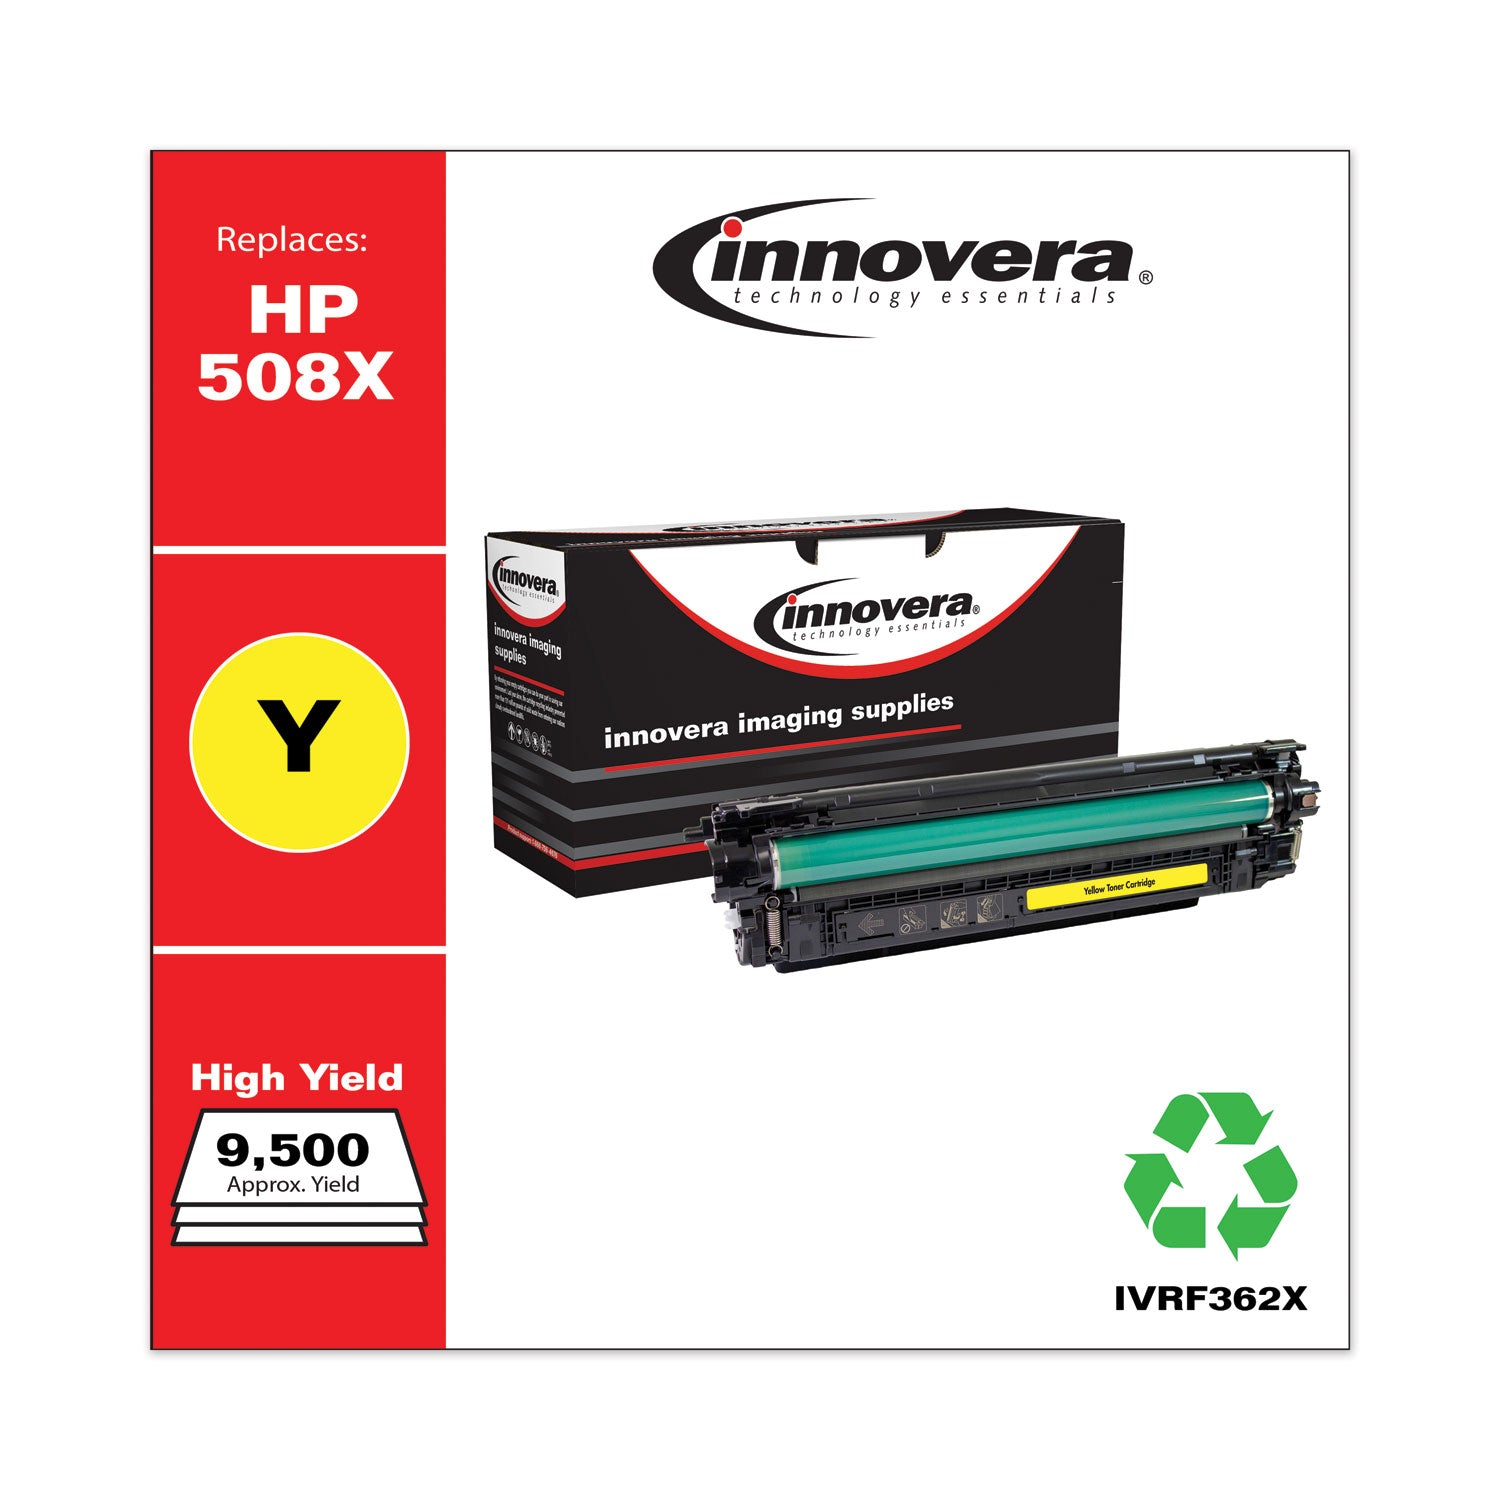 remanufactured-yellow-high-yield-toner-replacement-for-508x-cf362x-9500-page-yield_ivrf362x - 2